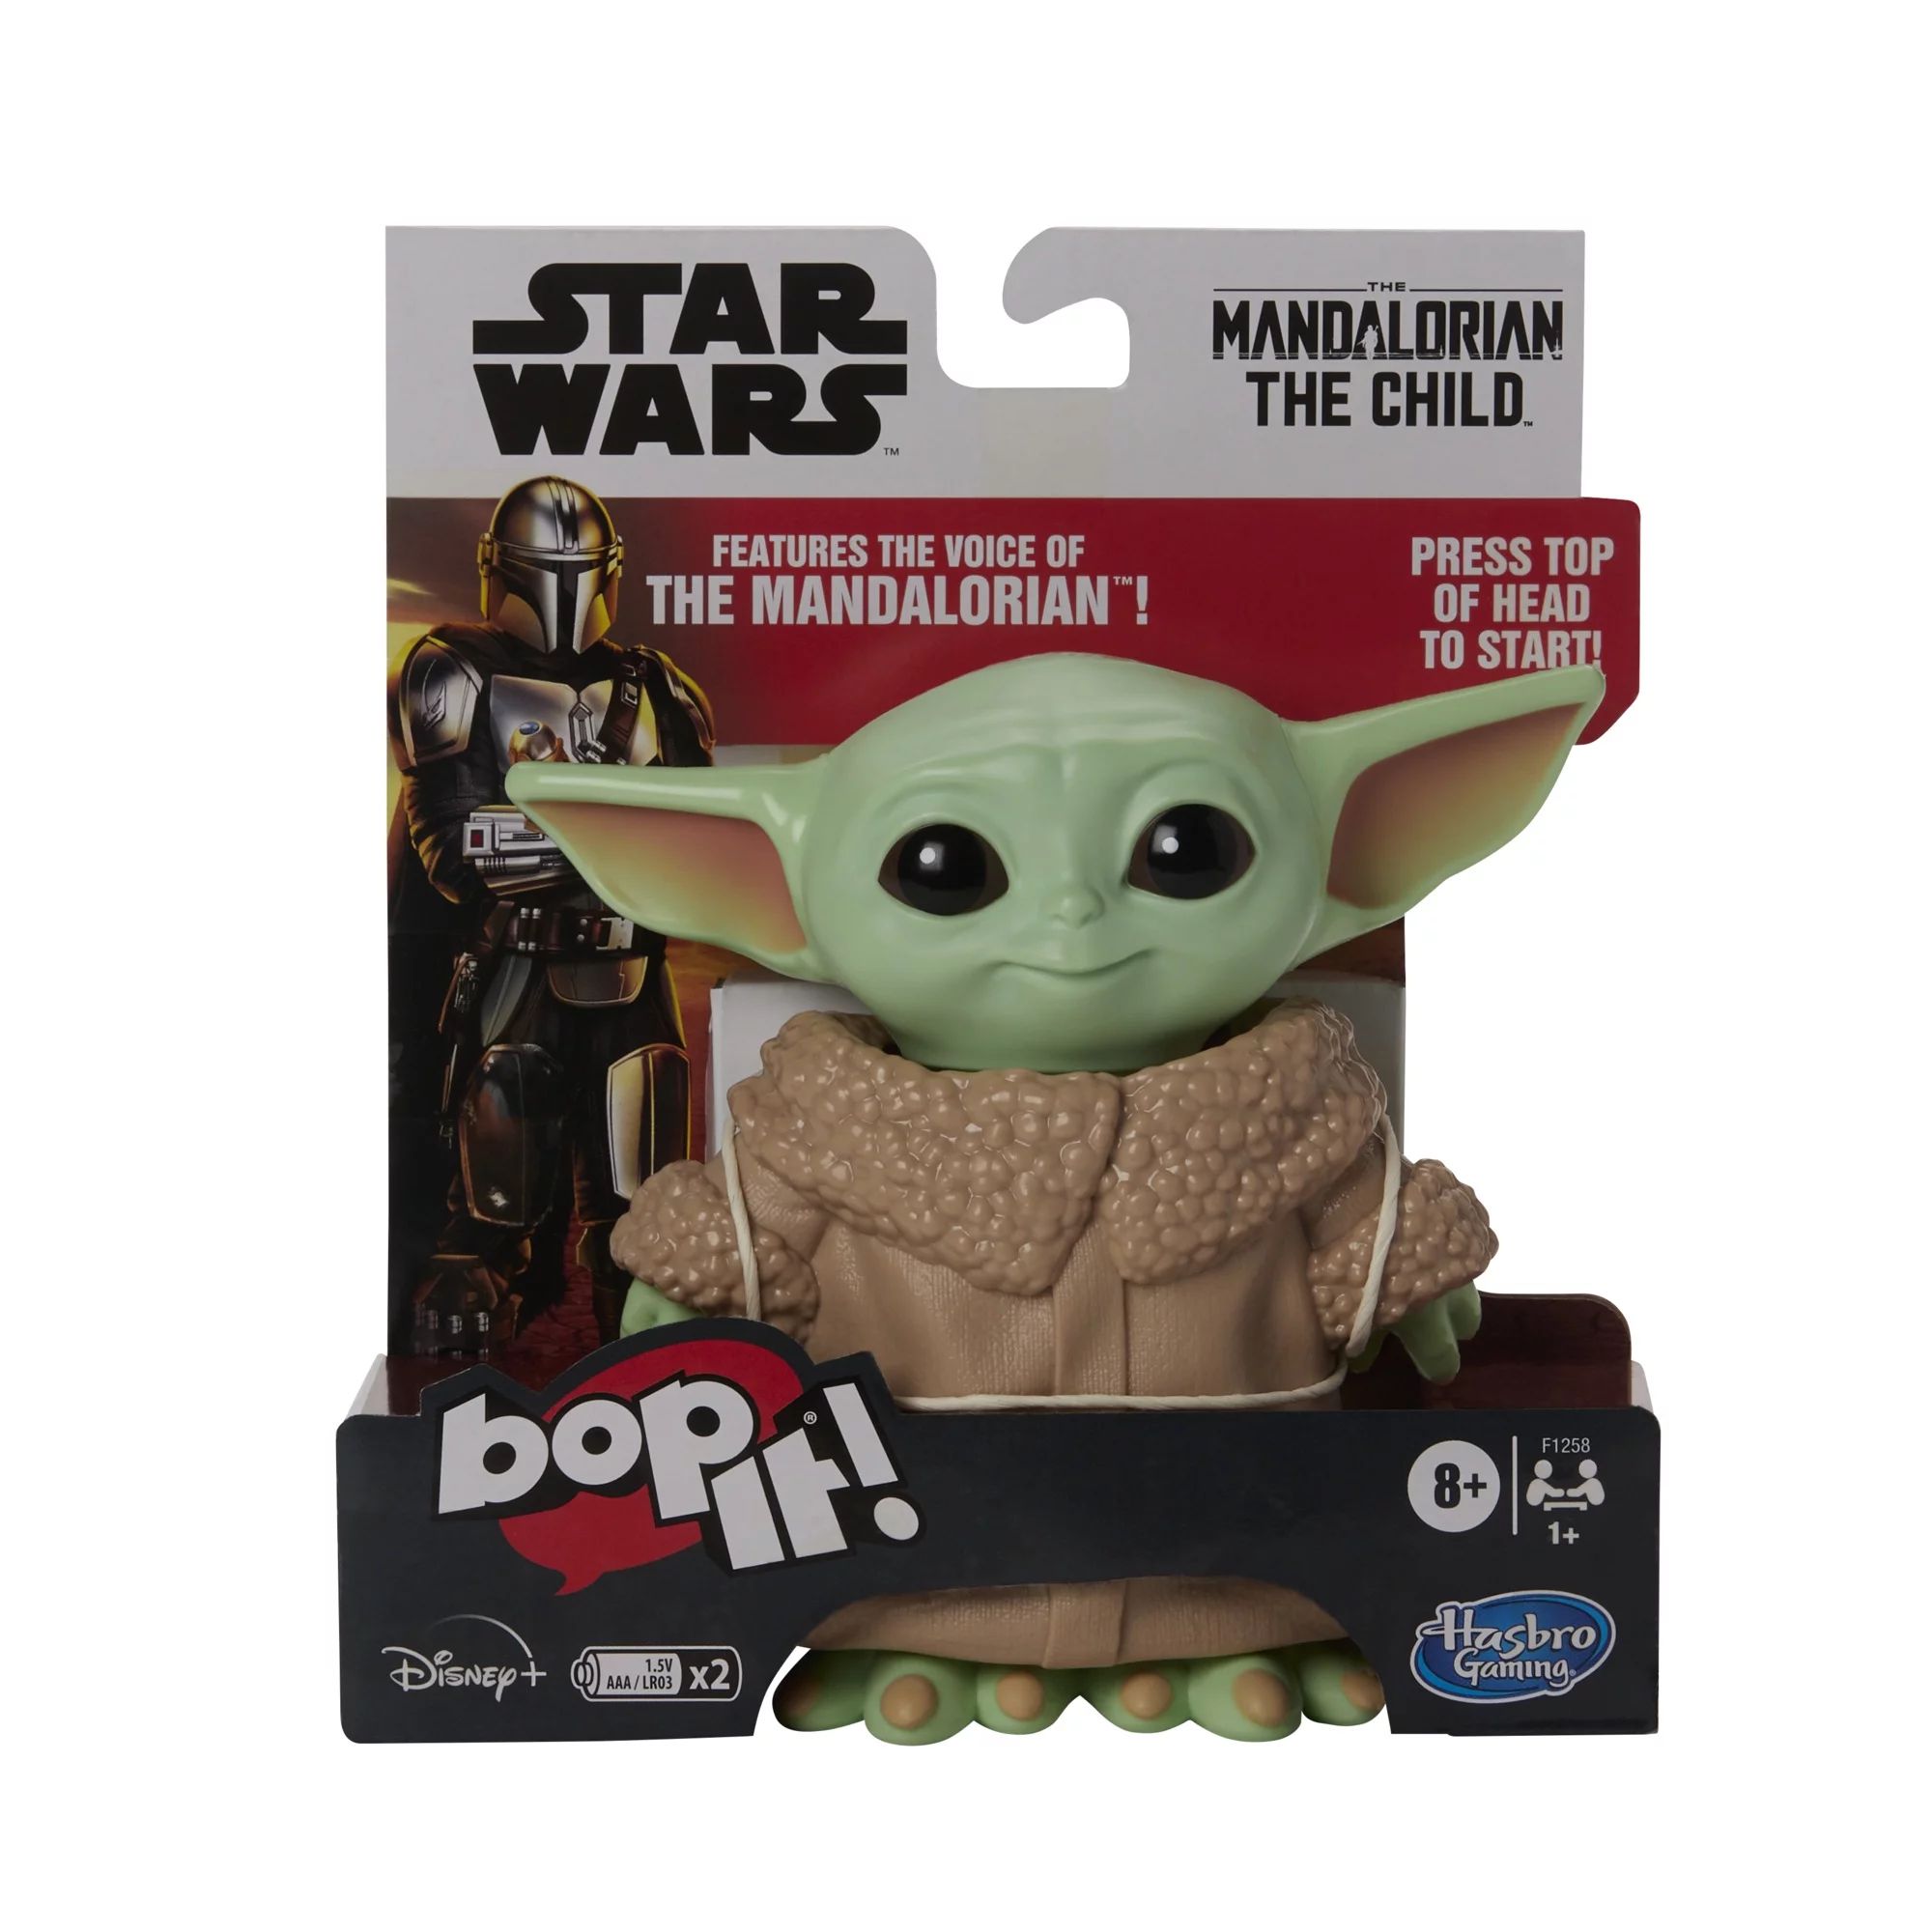 Bop It! Electronic Game for Kids Star Wars: The Mandalorian Edition, by Hasbro | Walmart (US)